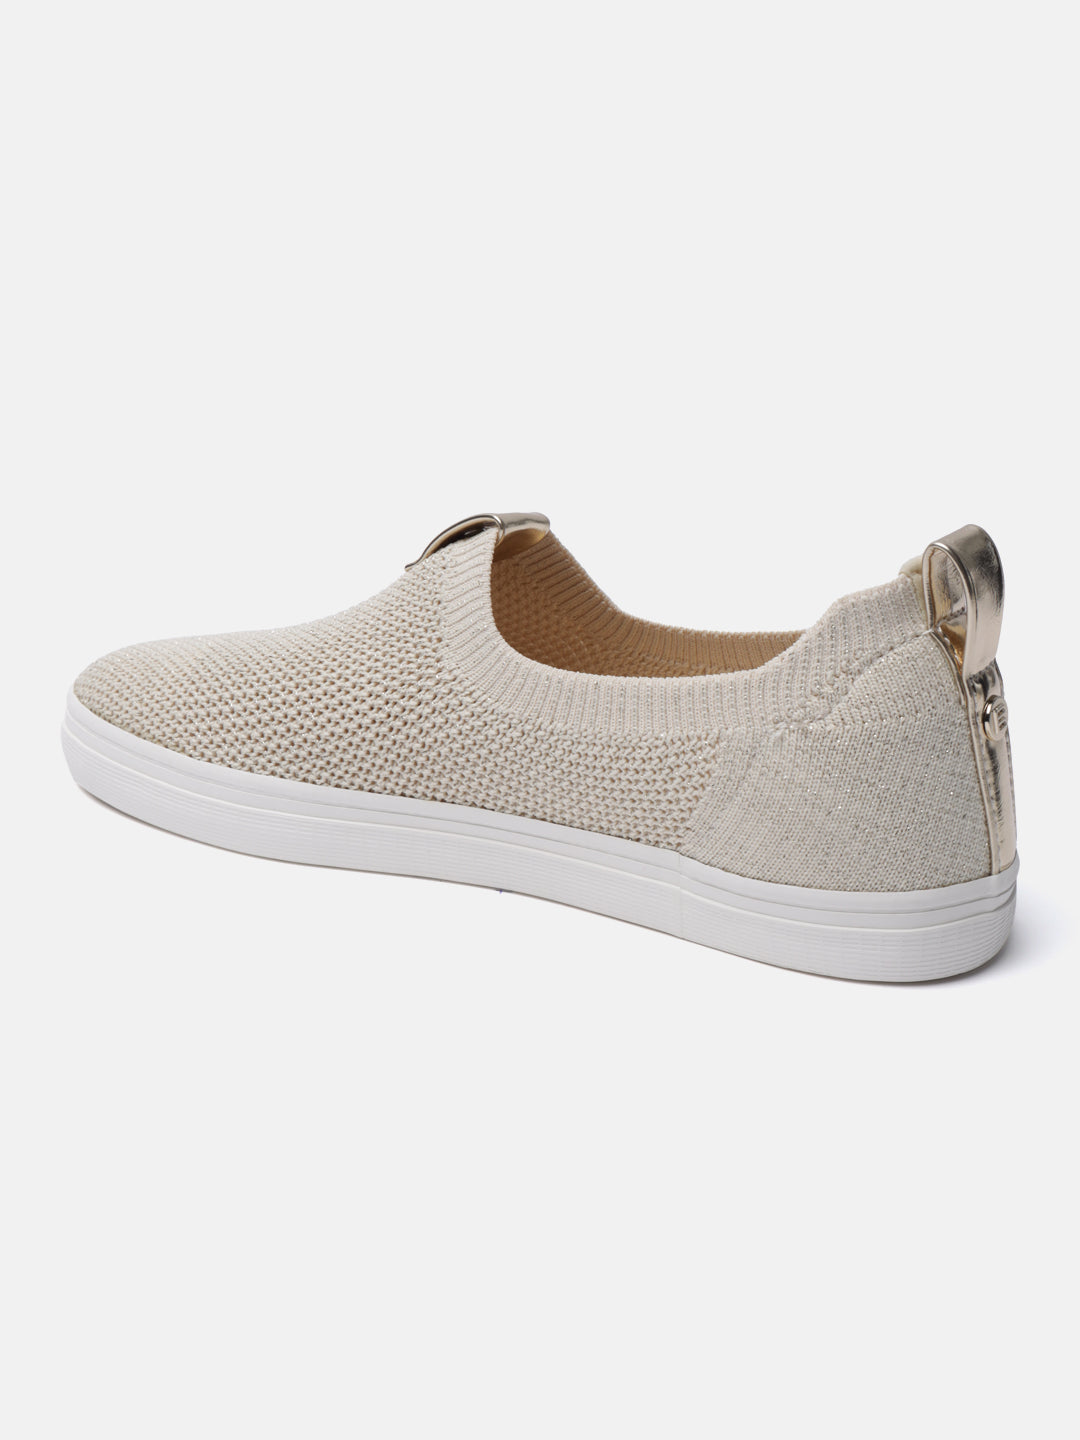 Lali Beige & Gold Casual Loafers